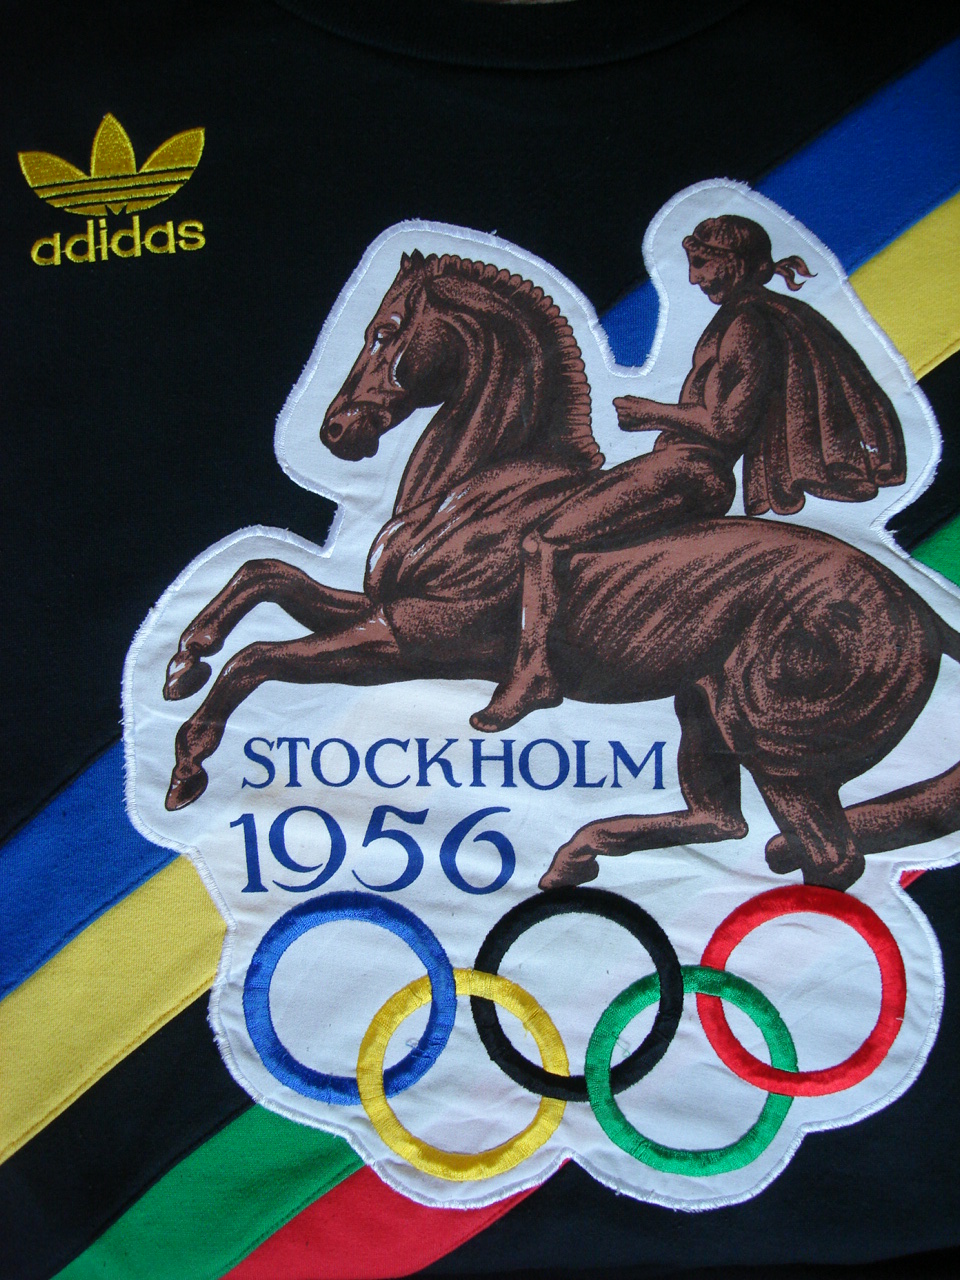 theothersideofthepillow: vintage ADIDAS stockholm 1956 OLYMPIC 1980's Large